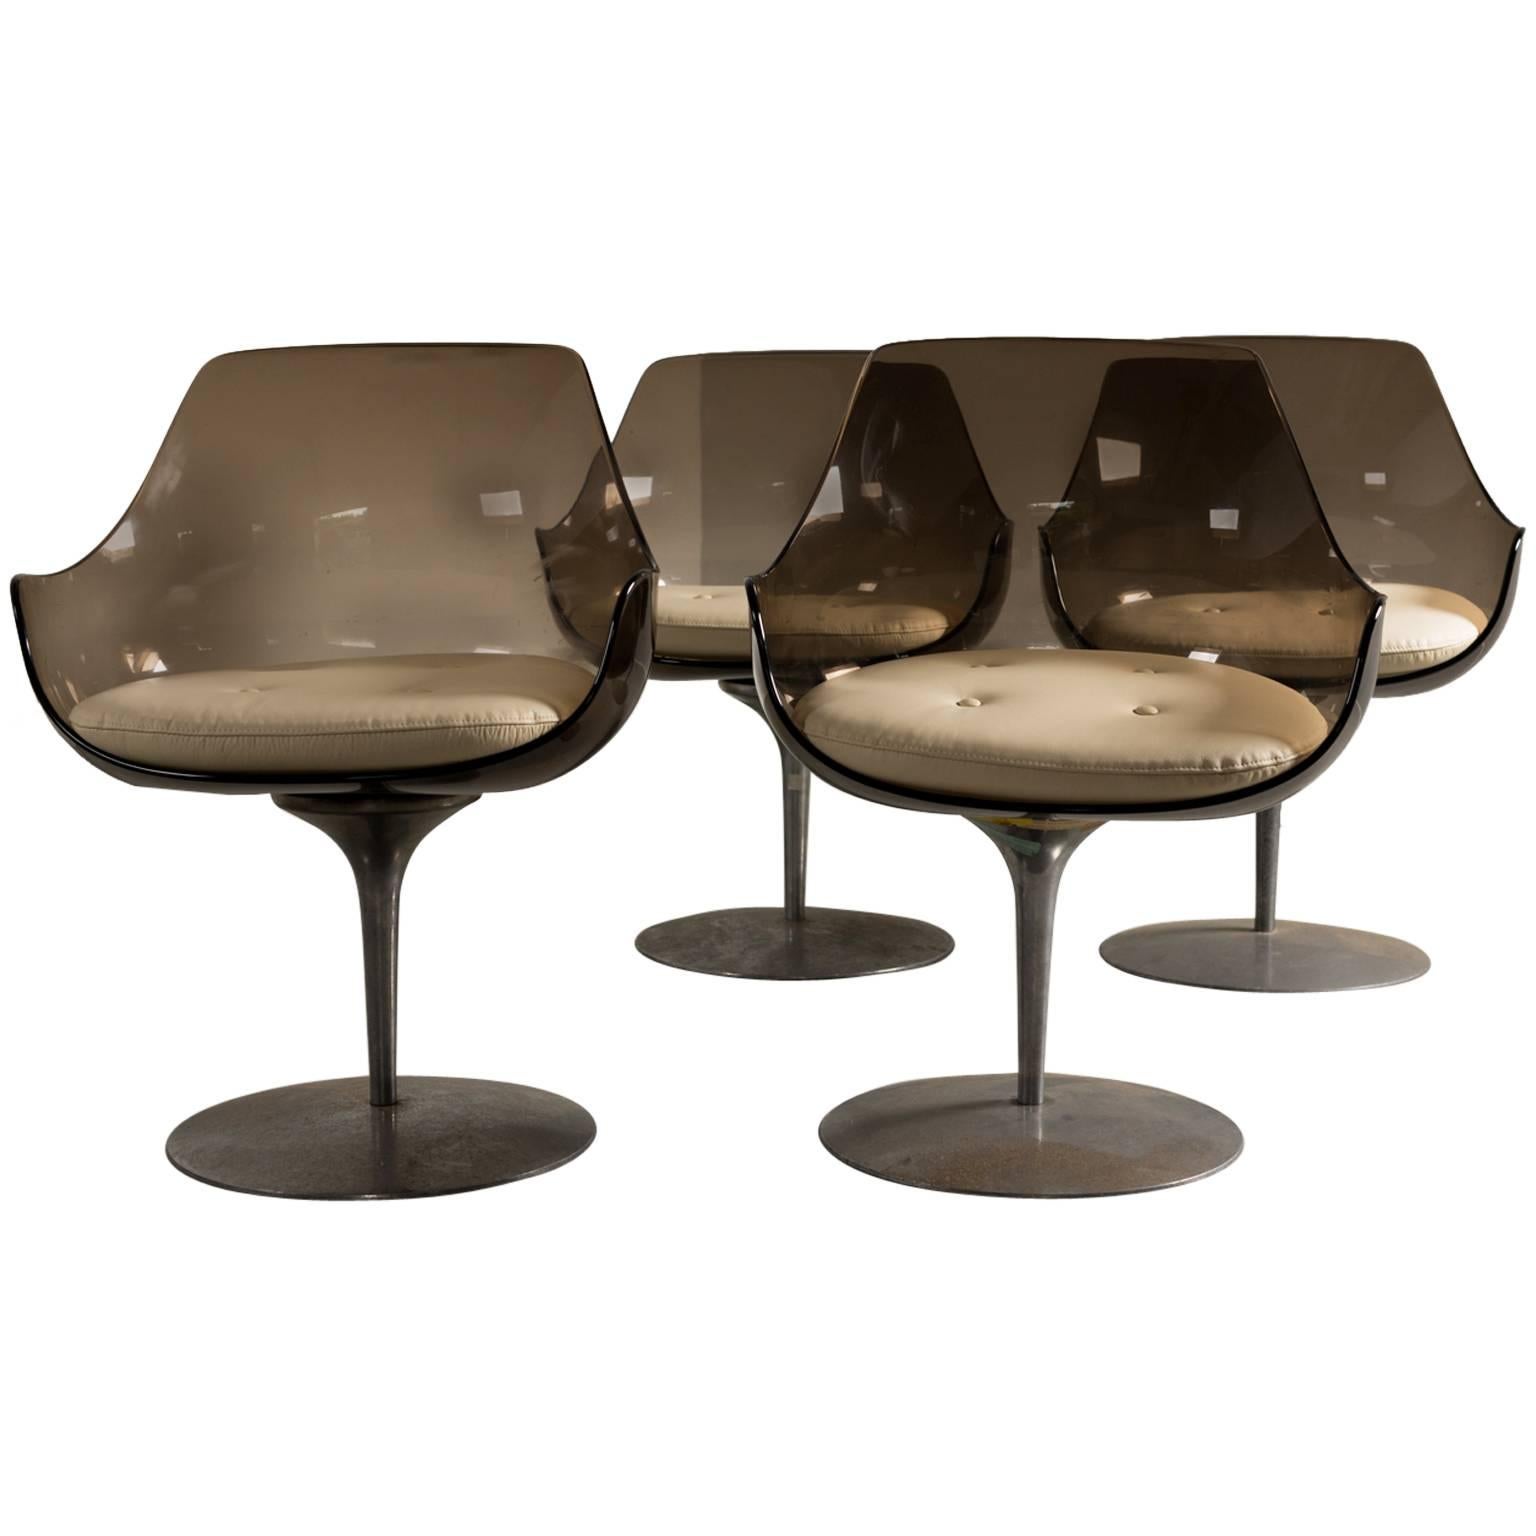 Erwine & Estelle Champagne Chairs, Set of Four, 1960s